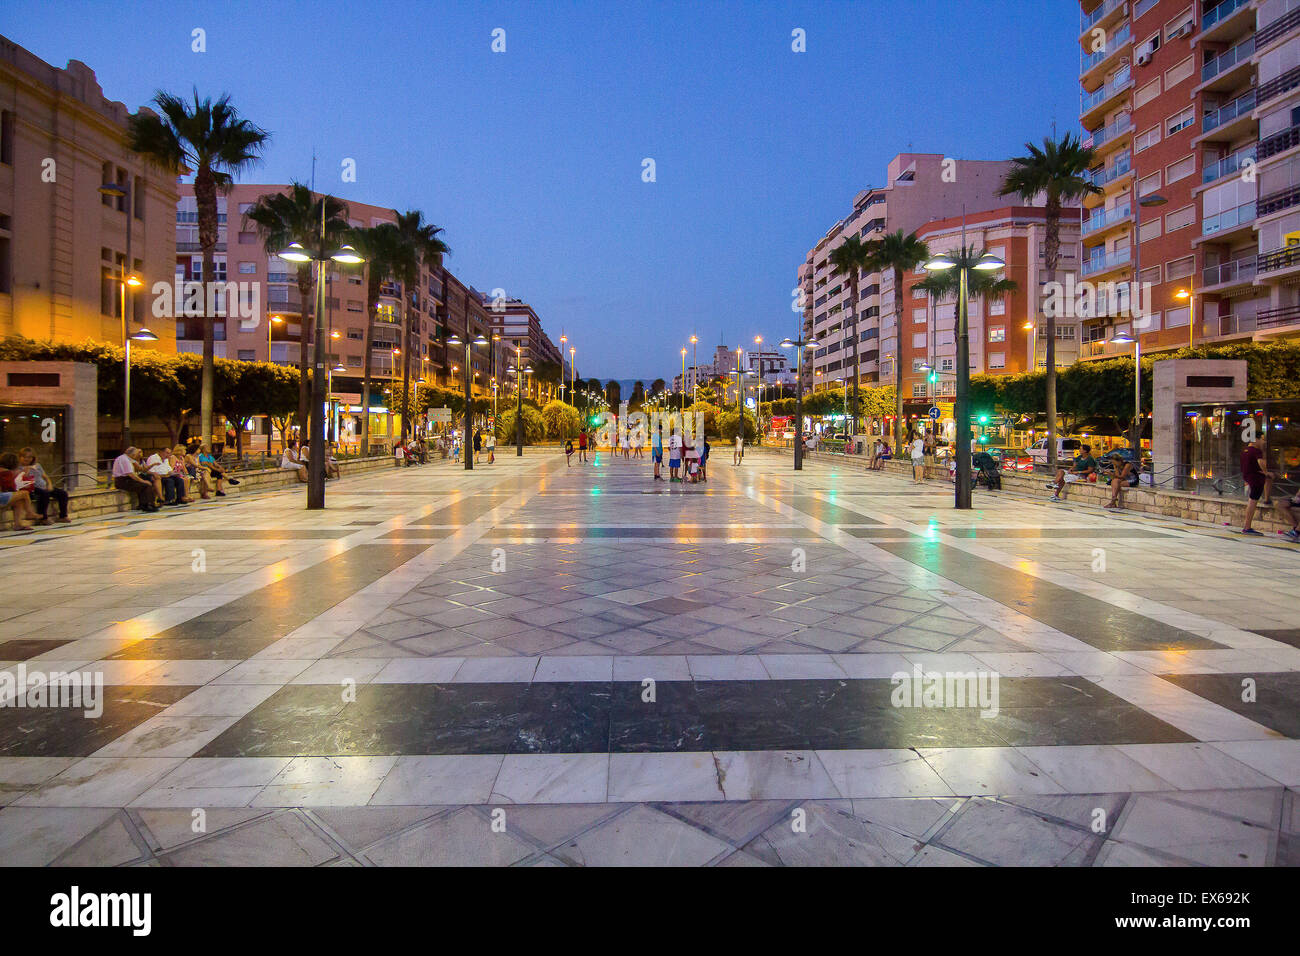 Almeria Spain September 1, 2014: People enjoying the summer evening on the promenade of the city, on September, 1, 2014 in Almer Stock Photo